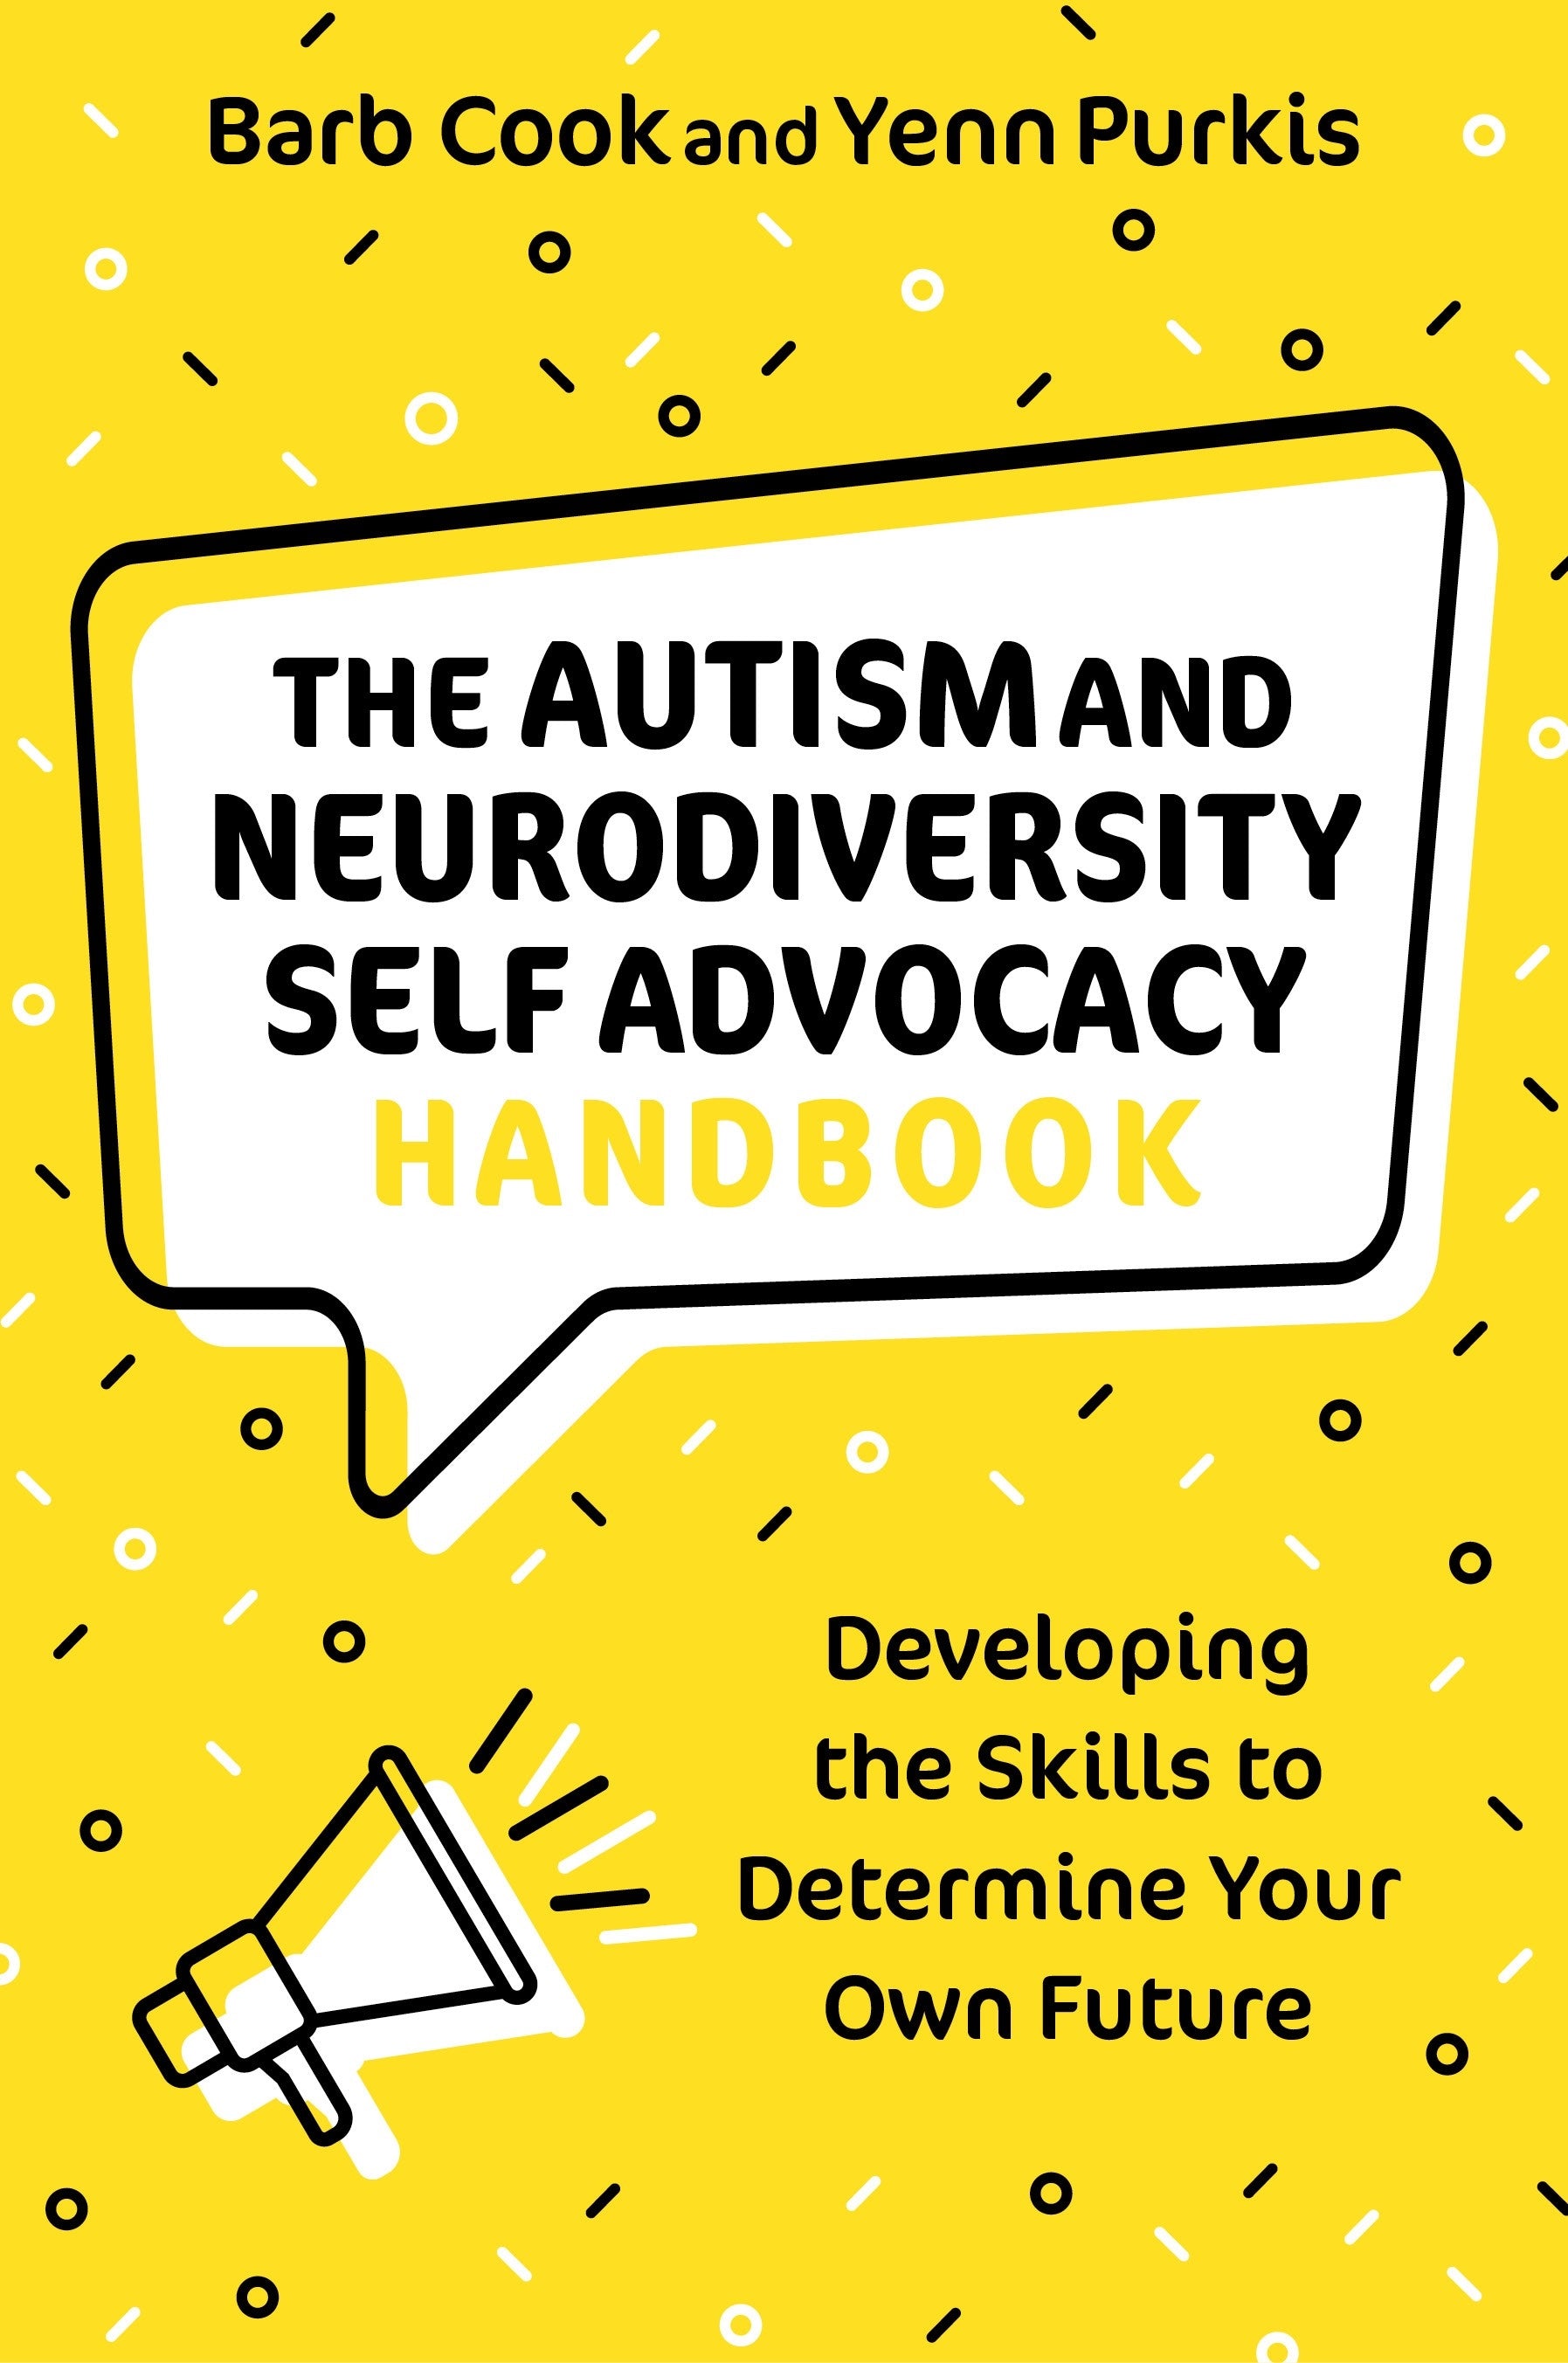 The Autism and Neurodiversity Self Advocacy Handbook by Barb Cook, Yenn Purkis